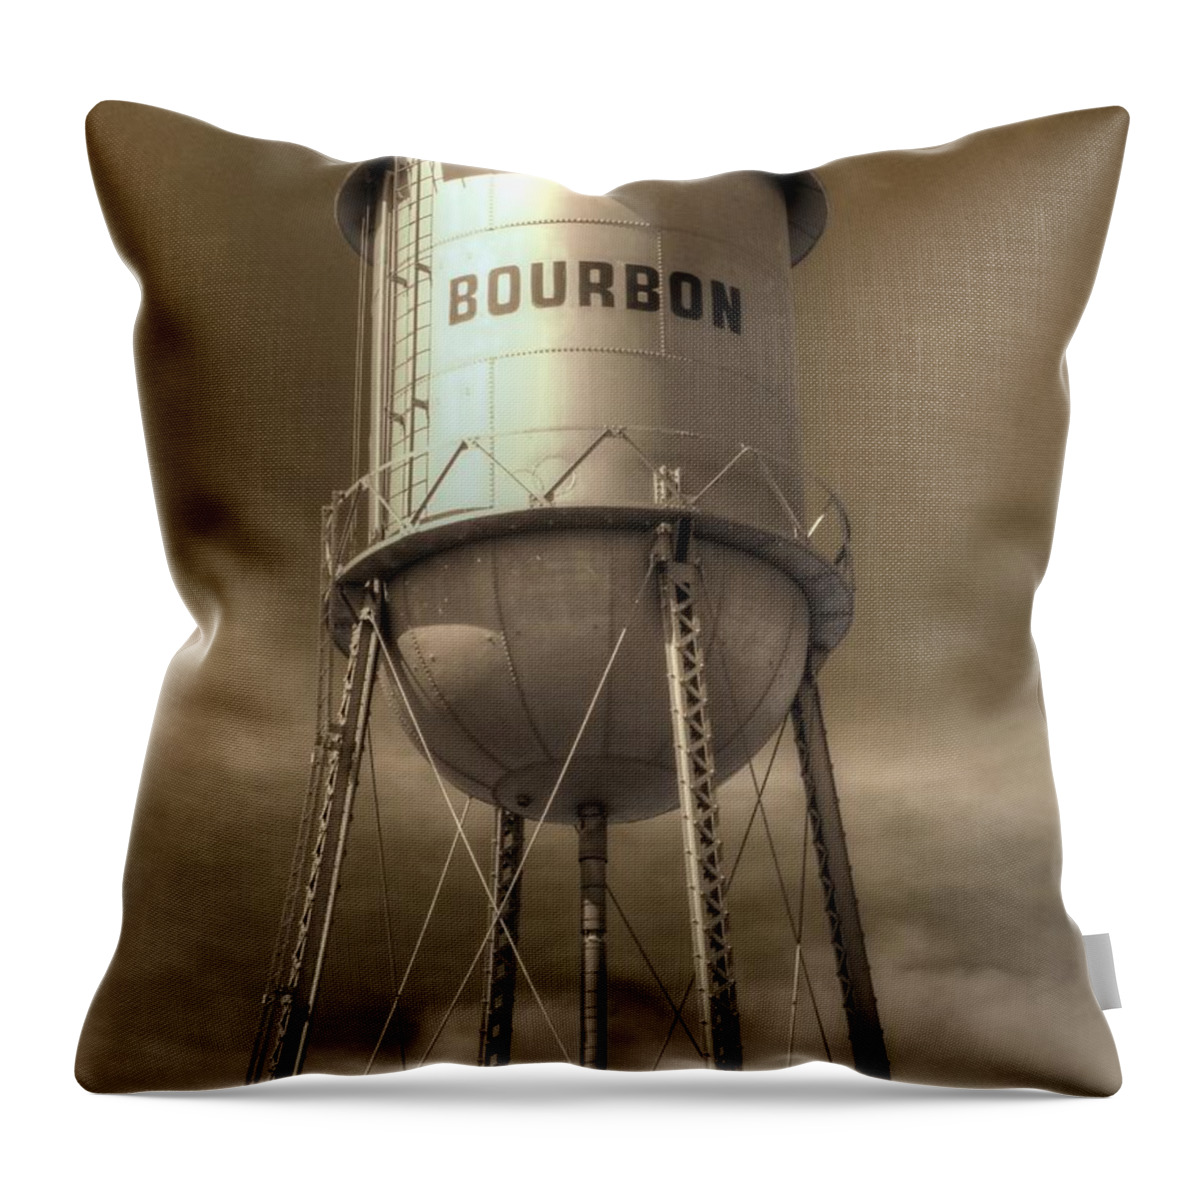 Bourbon Throw Pillow featuring the photograph Bourbon by Jane Linders